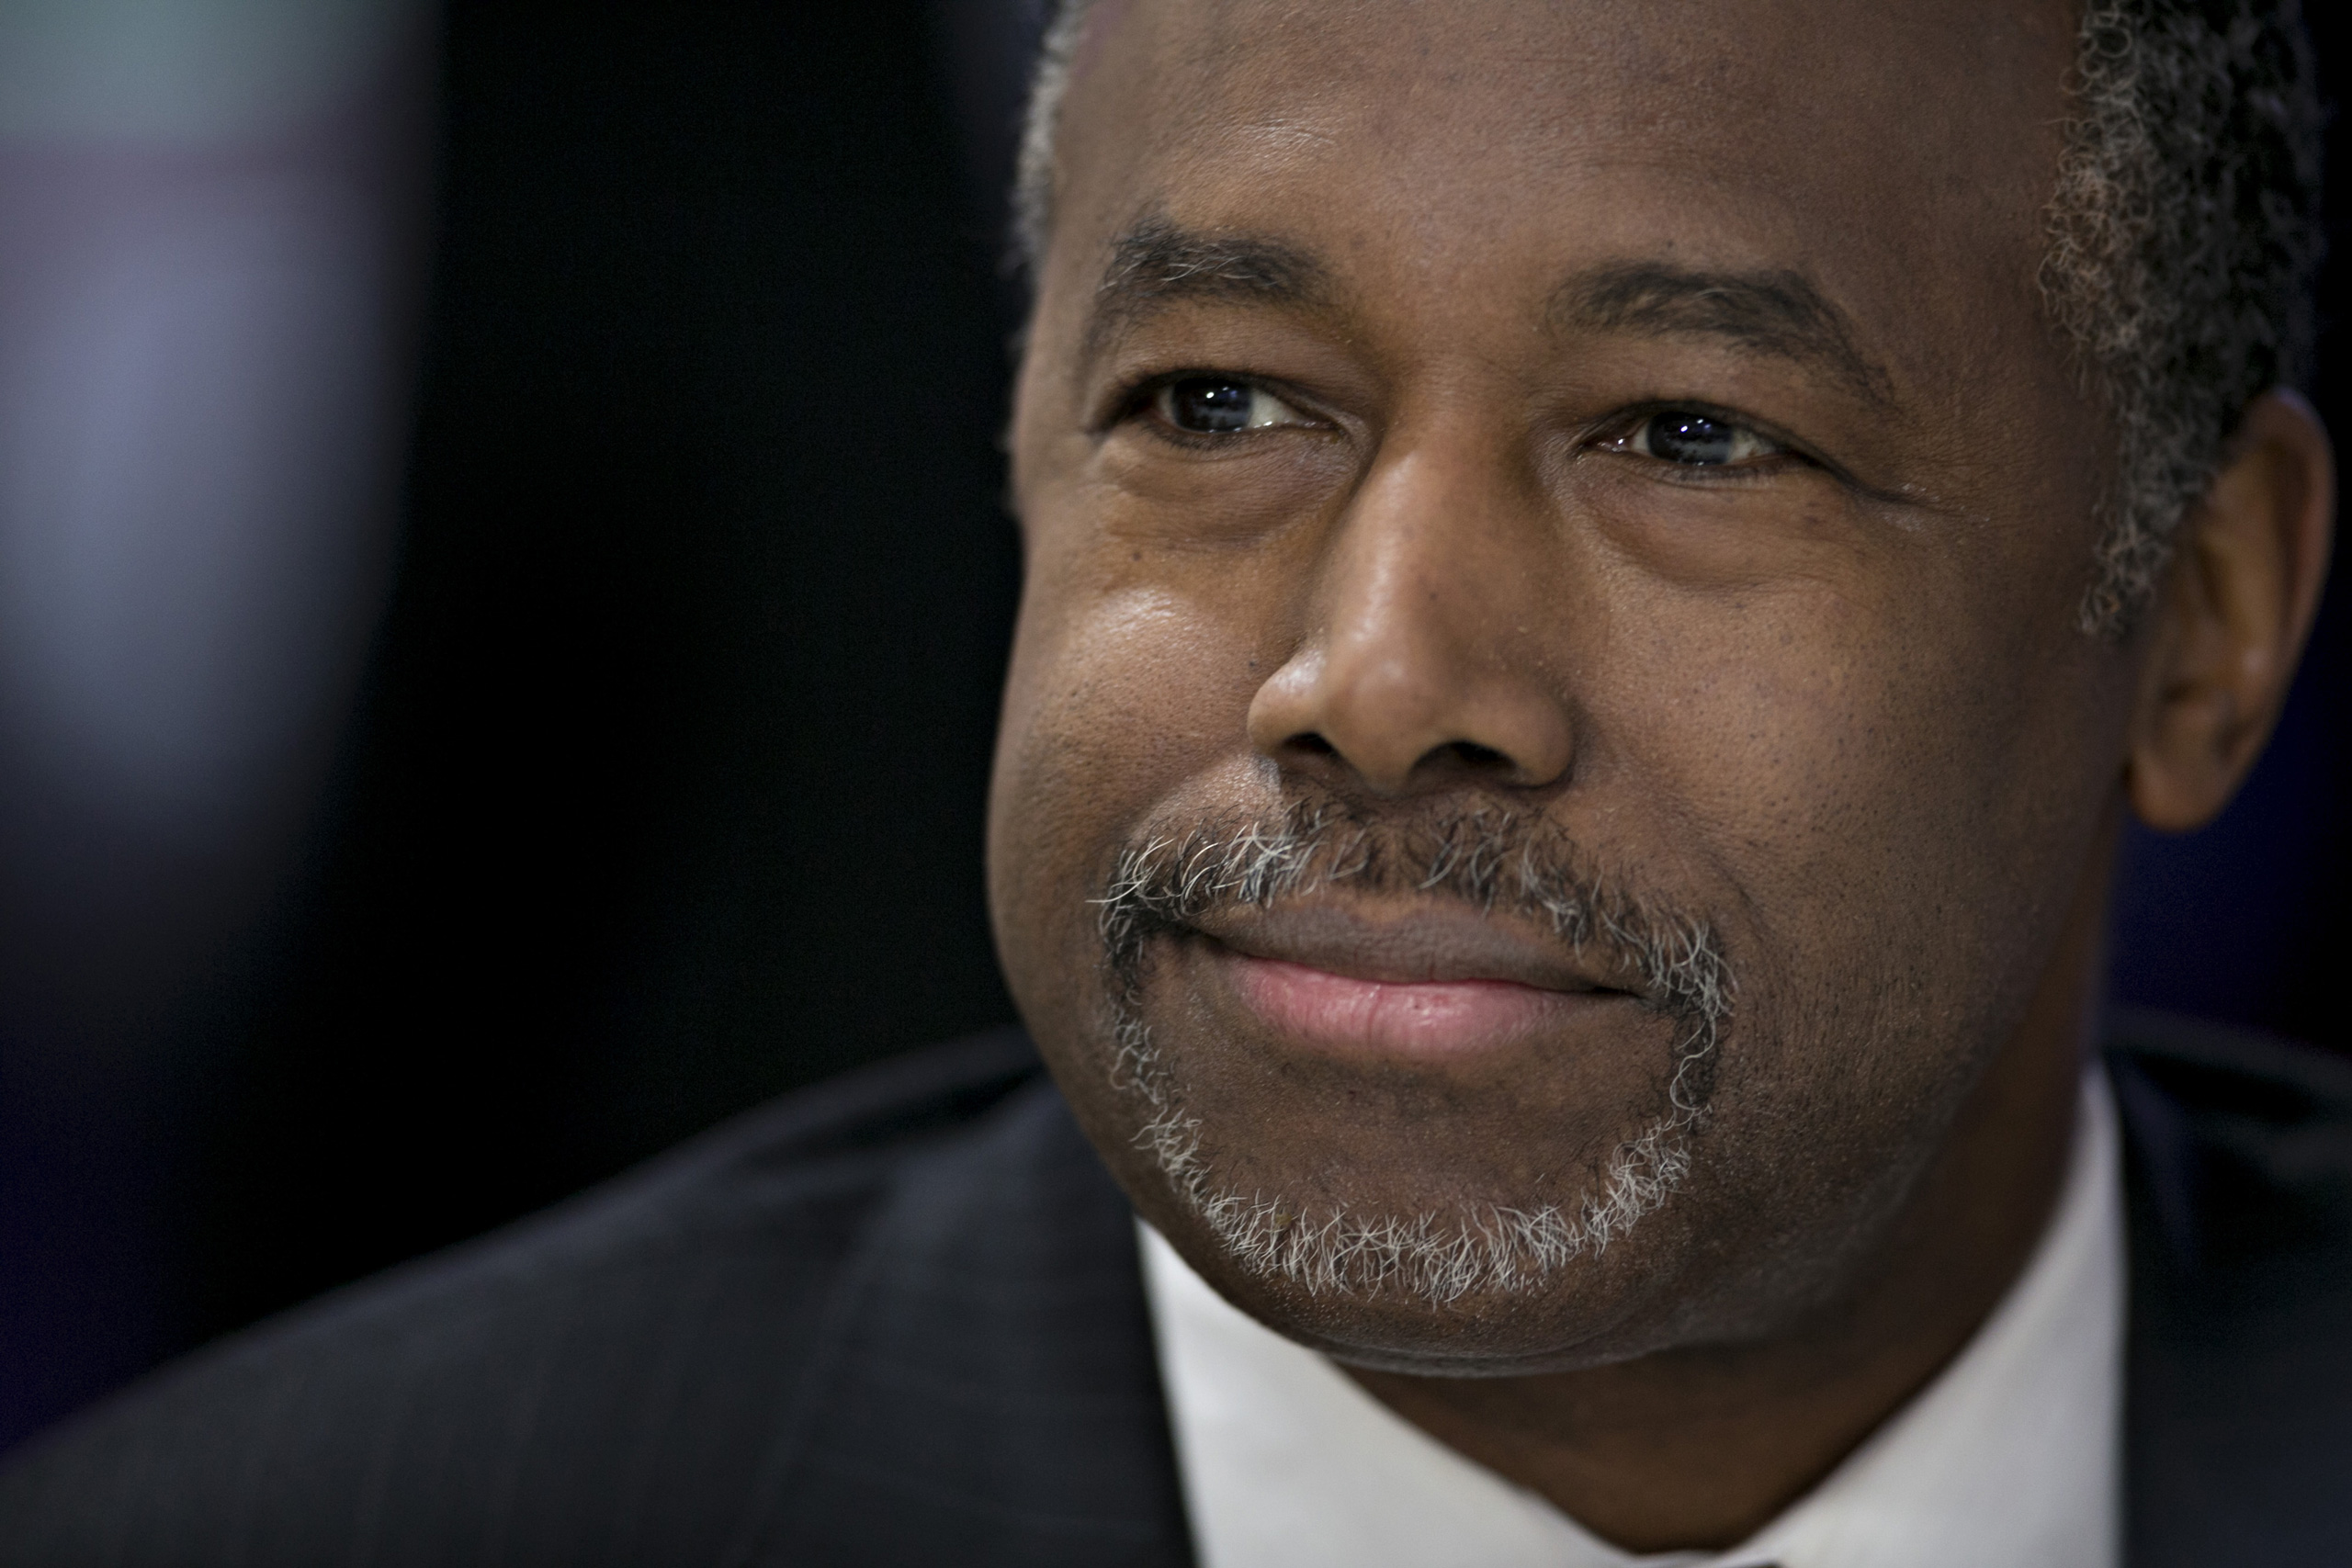 Ben Carson, retired neurosurgeon and 2016 Republican presidential candidate, listens to a question during a Bloomberg Politics interview in Des Moines, Iowa, on Jan. 27, 2016. (Andrew Harrer—Bloomberg/Getty Images)